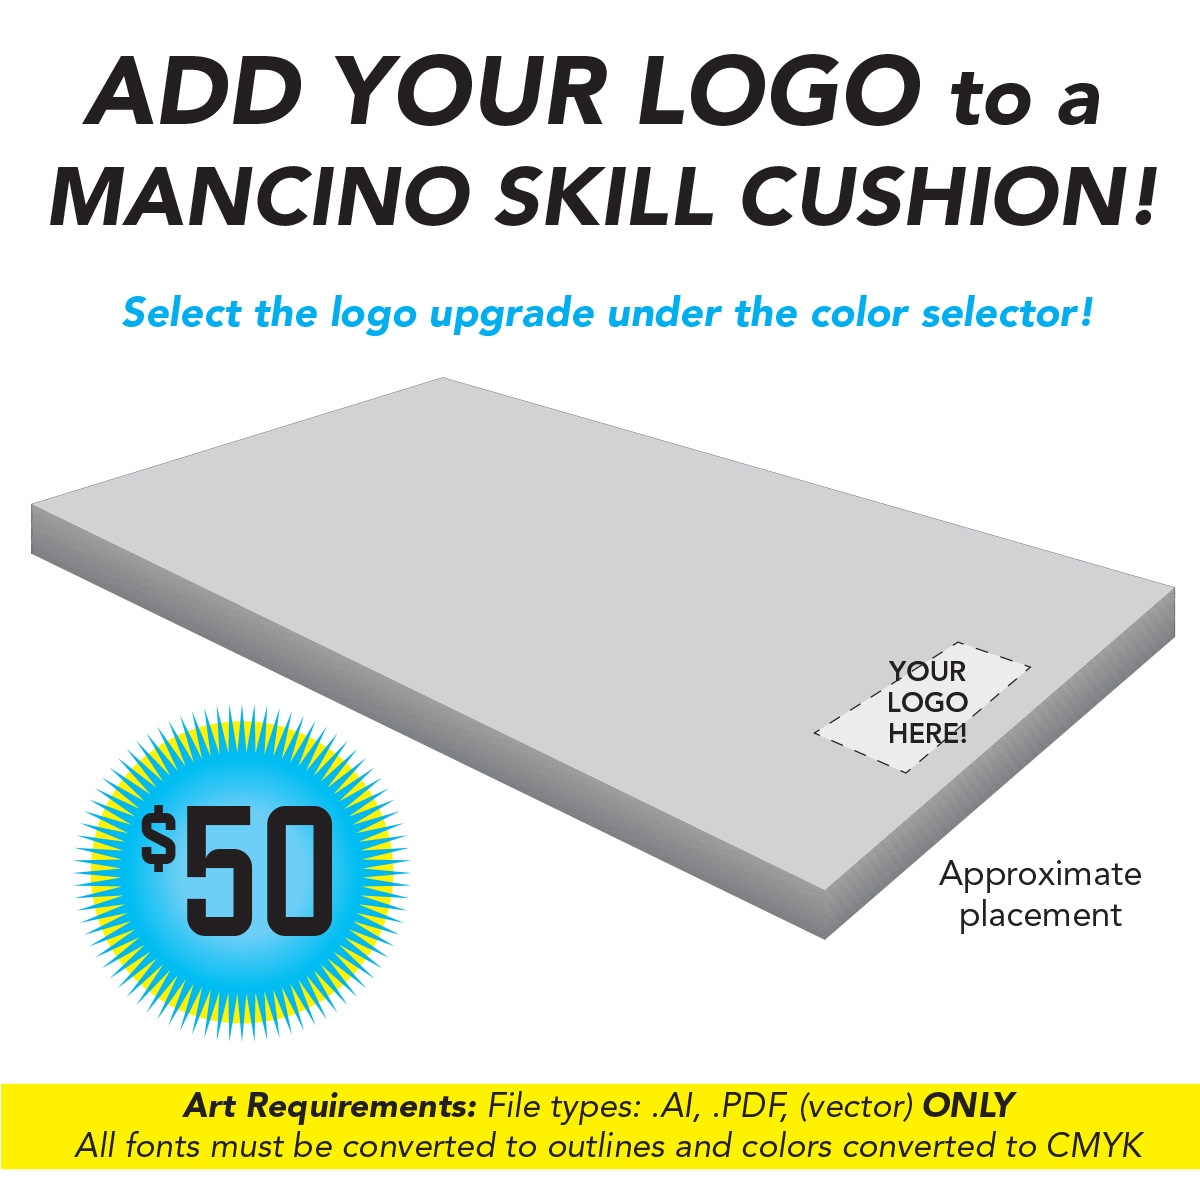 add your logo options to a mancino skill cushion